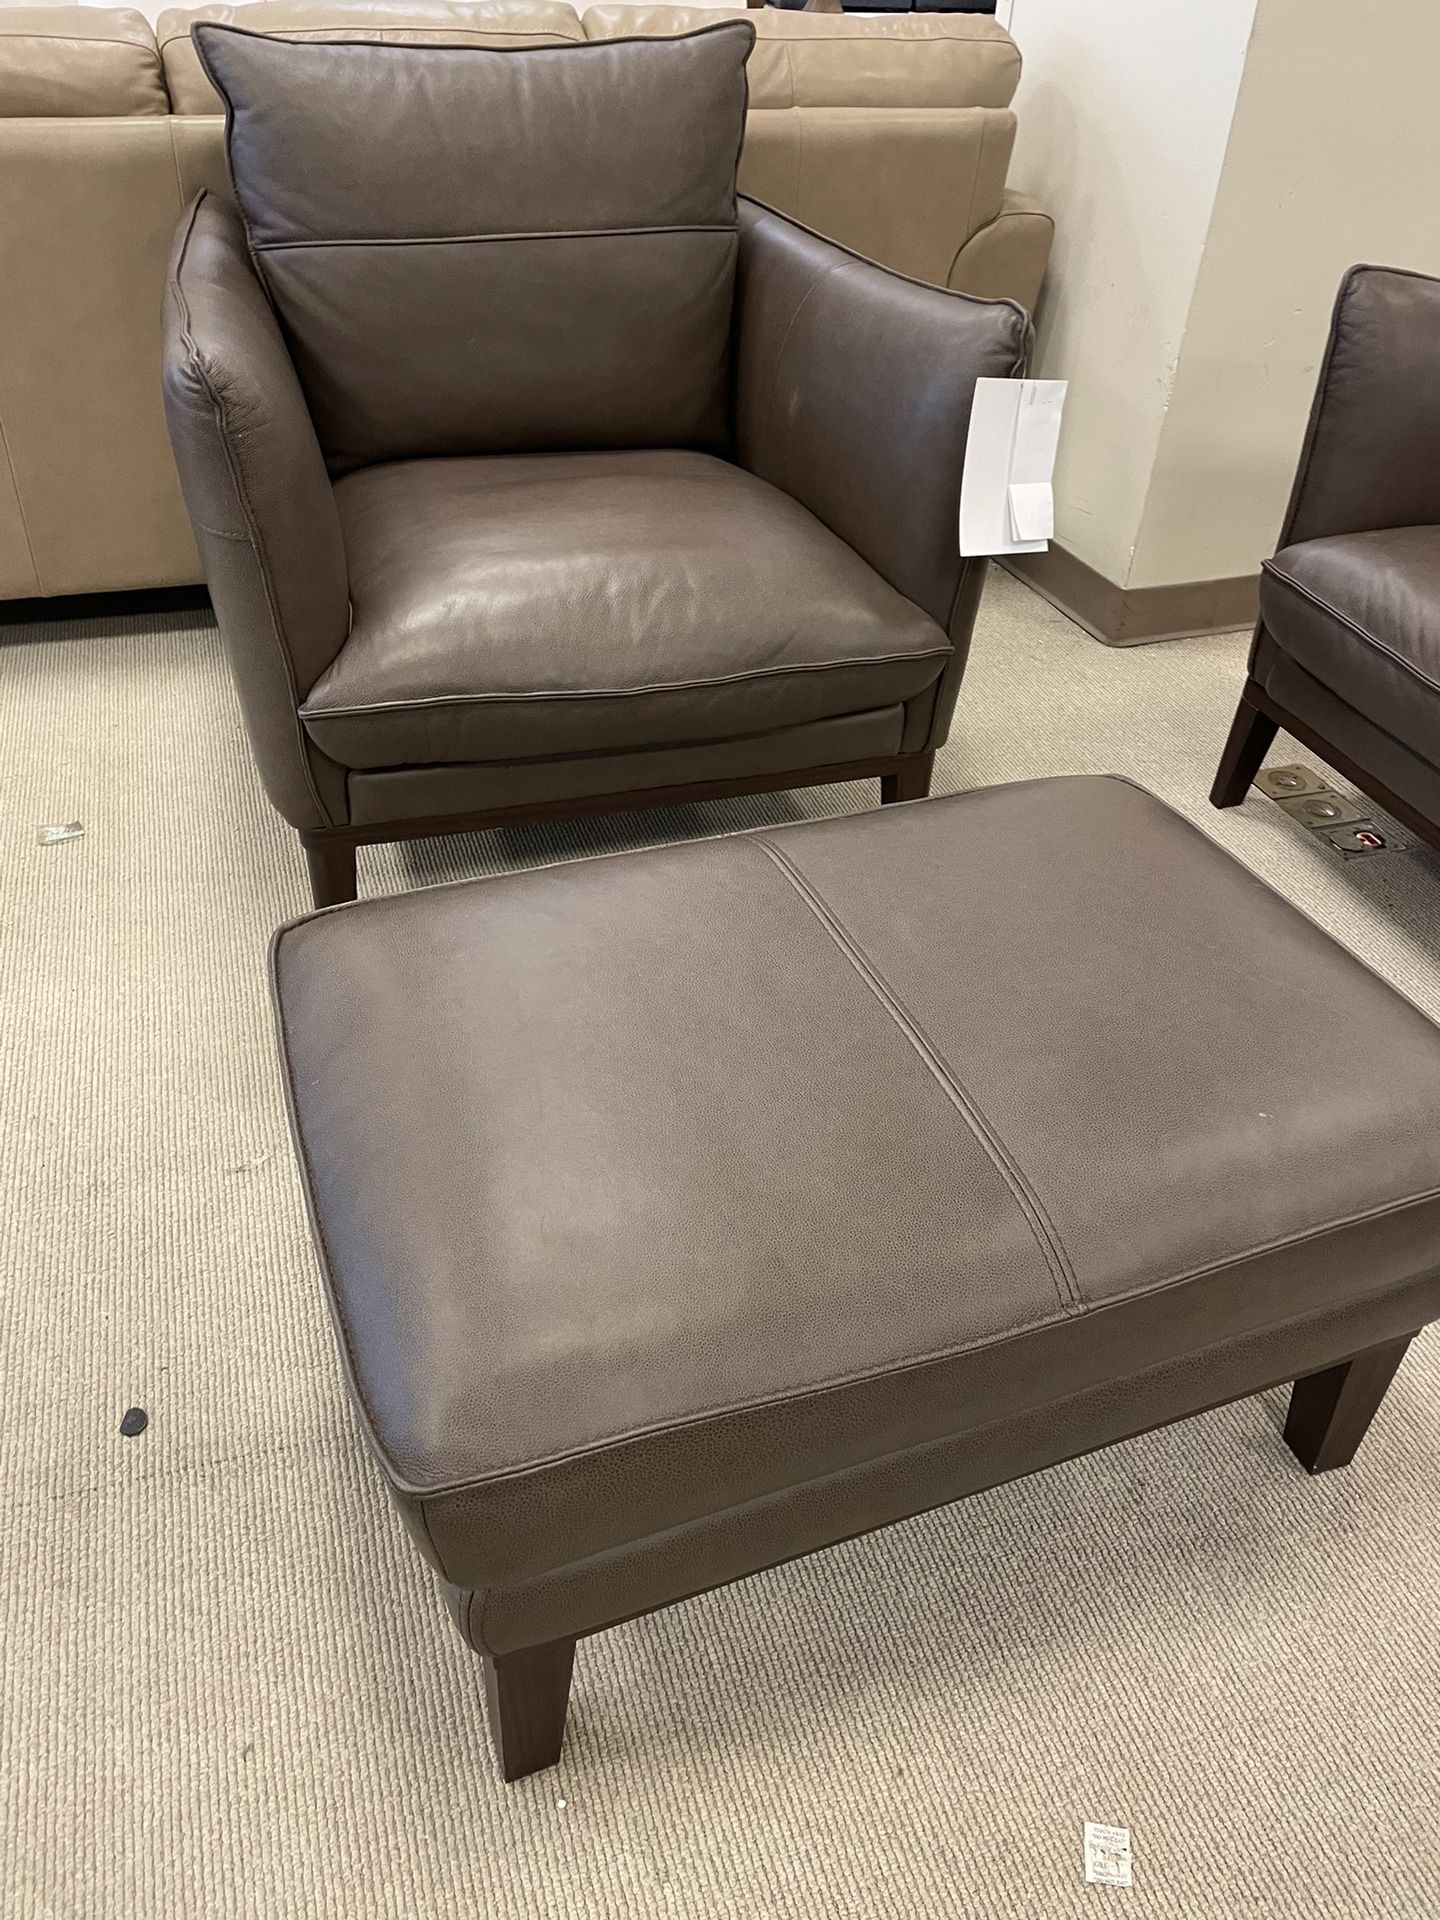 BRAND NEW 100% REAL LEATHER SOFA CHAIR AND OTTOMAN 